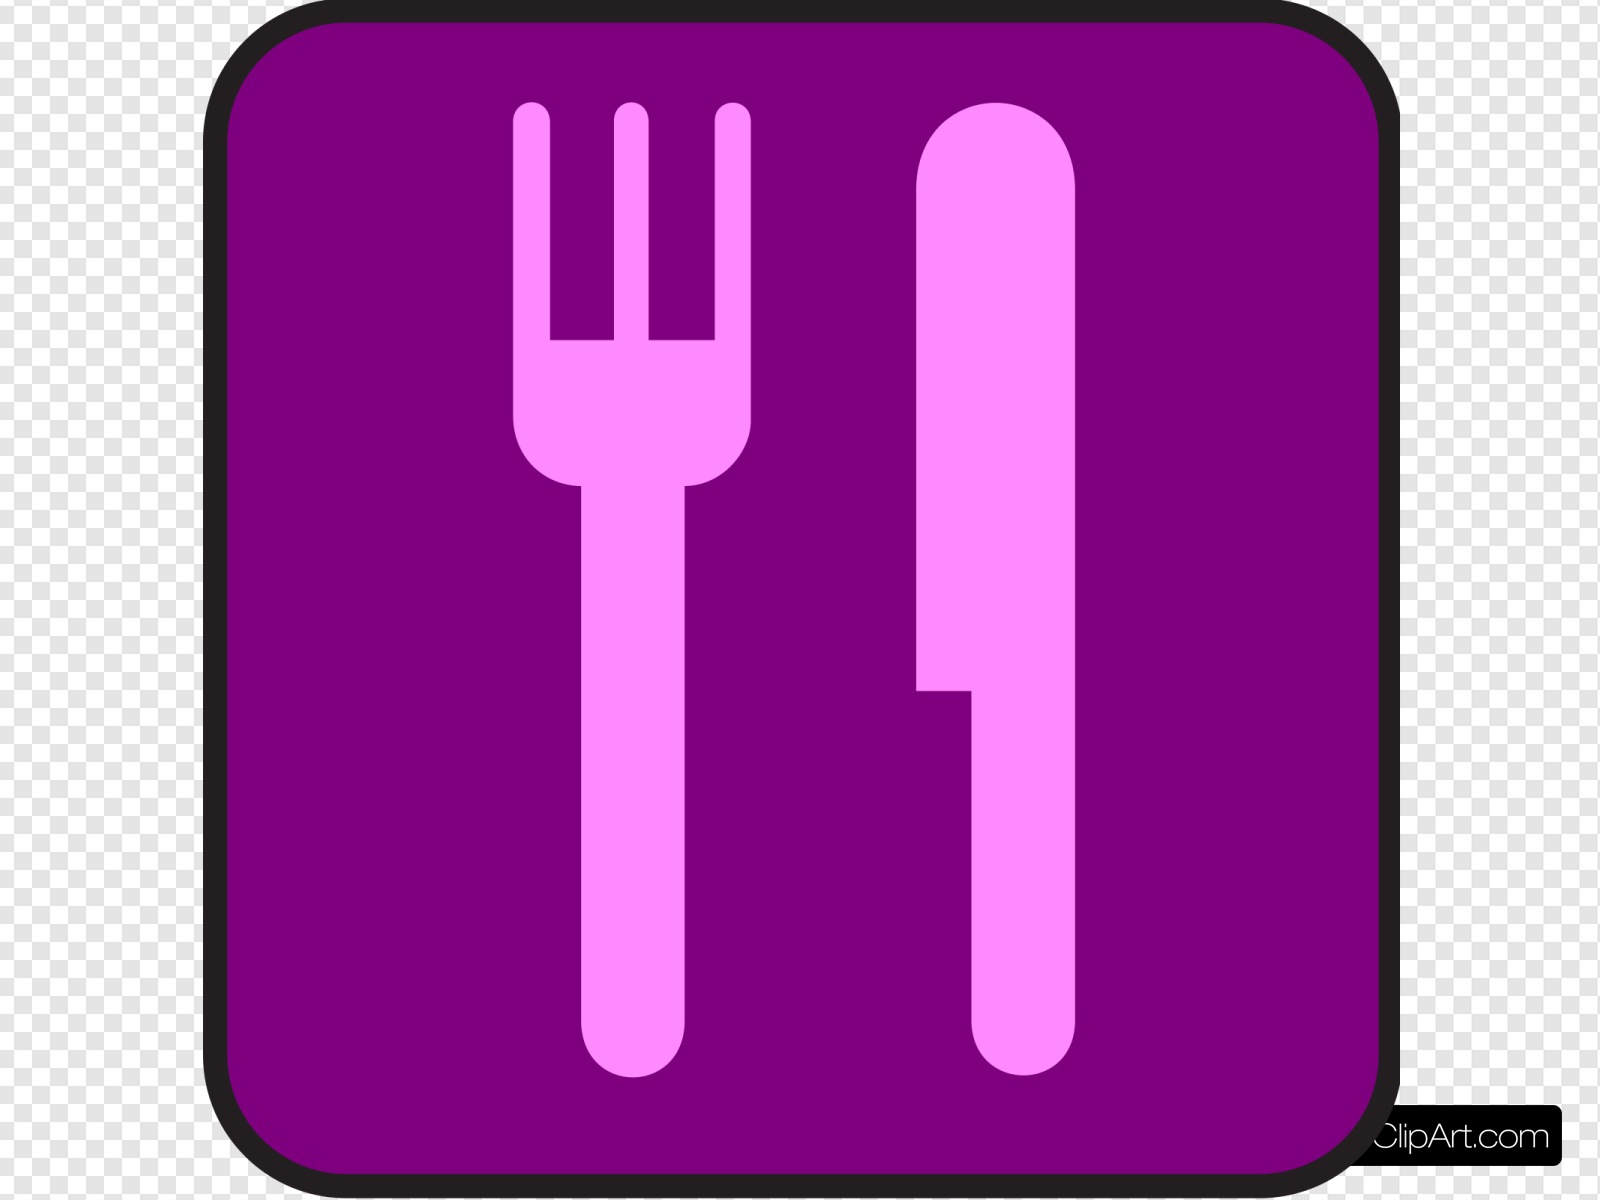 Purple And Pink Knife And Fork Clip art, Icon and SVG